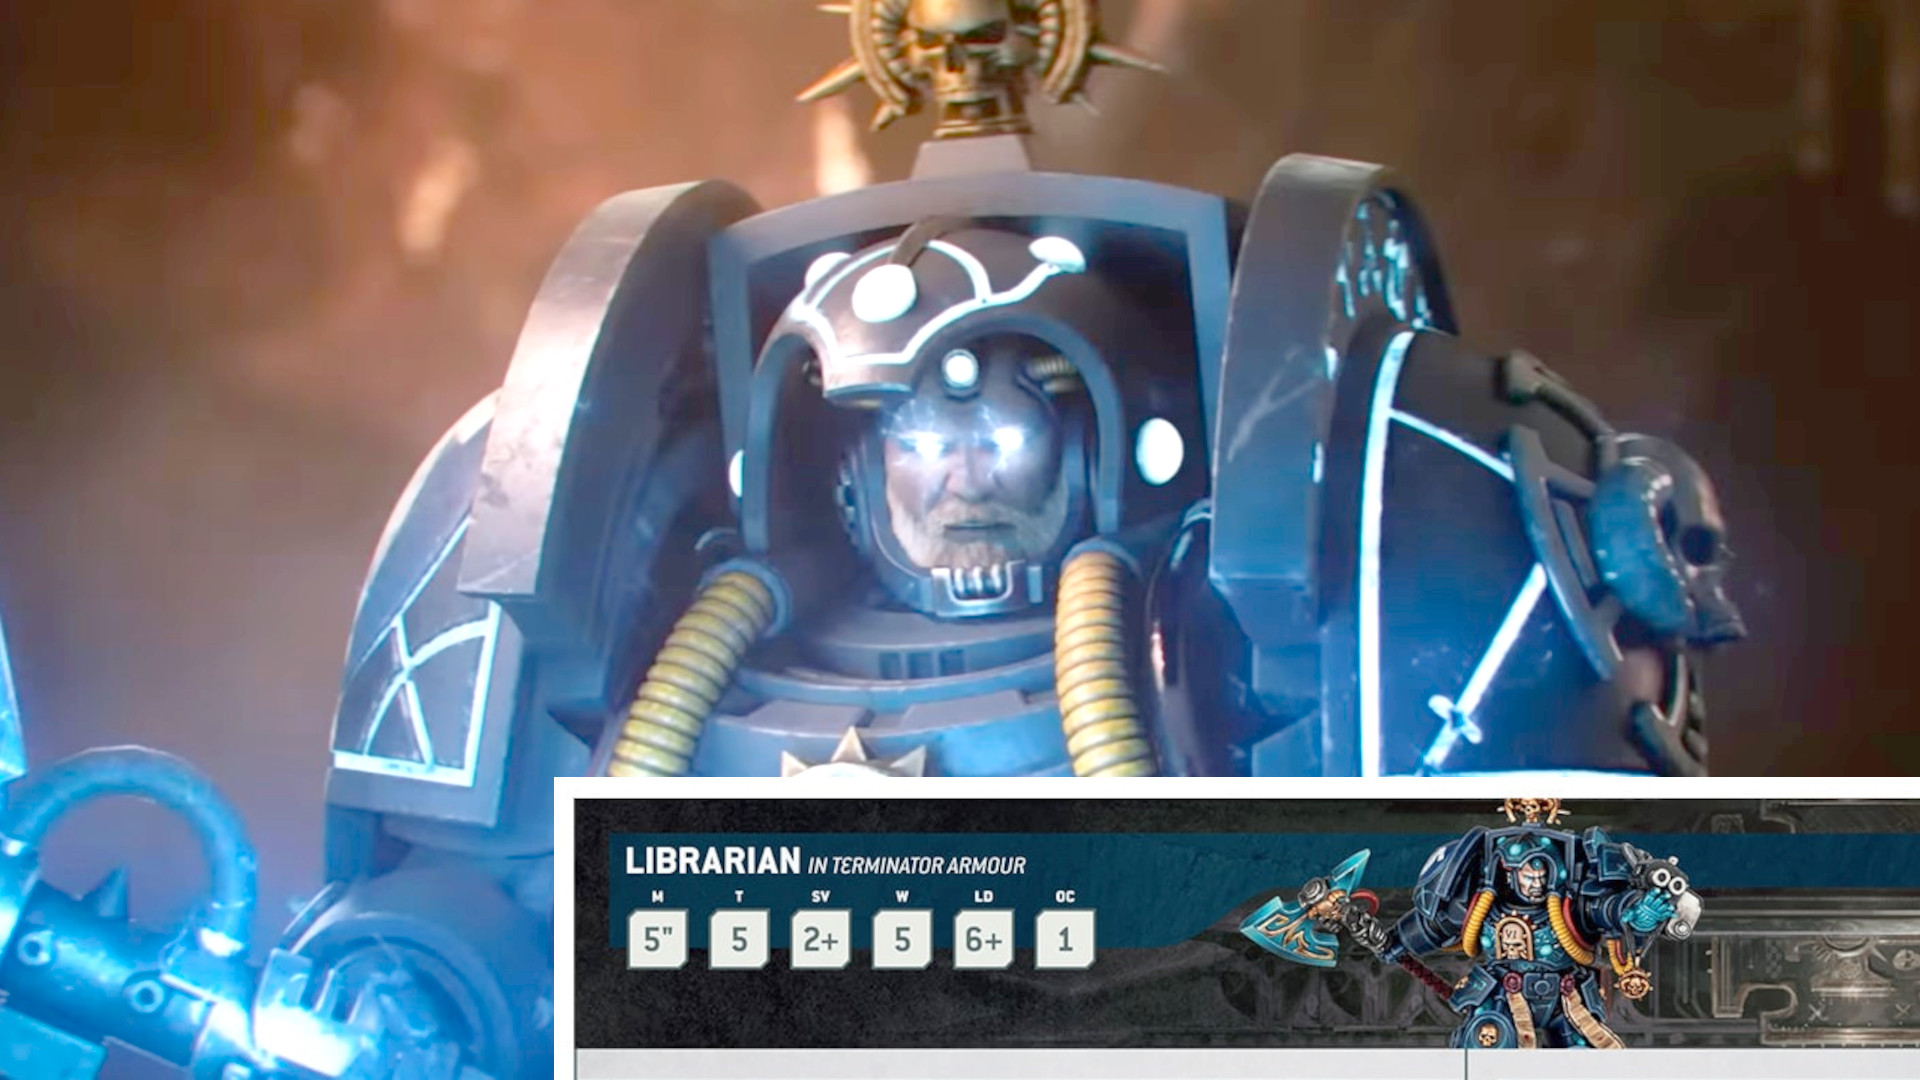 Warhammer 40k Games: Embrace the Psychic Powers, Control the Warp